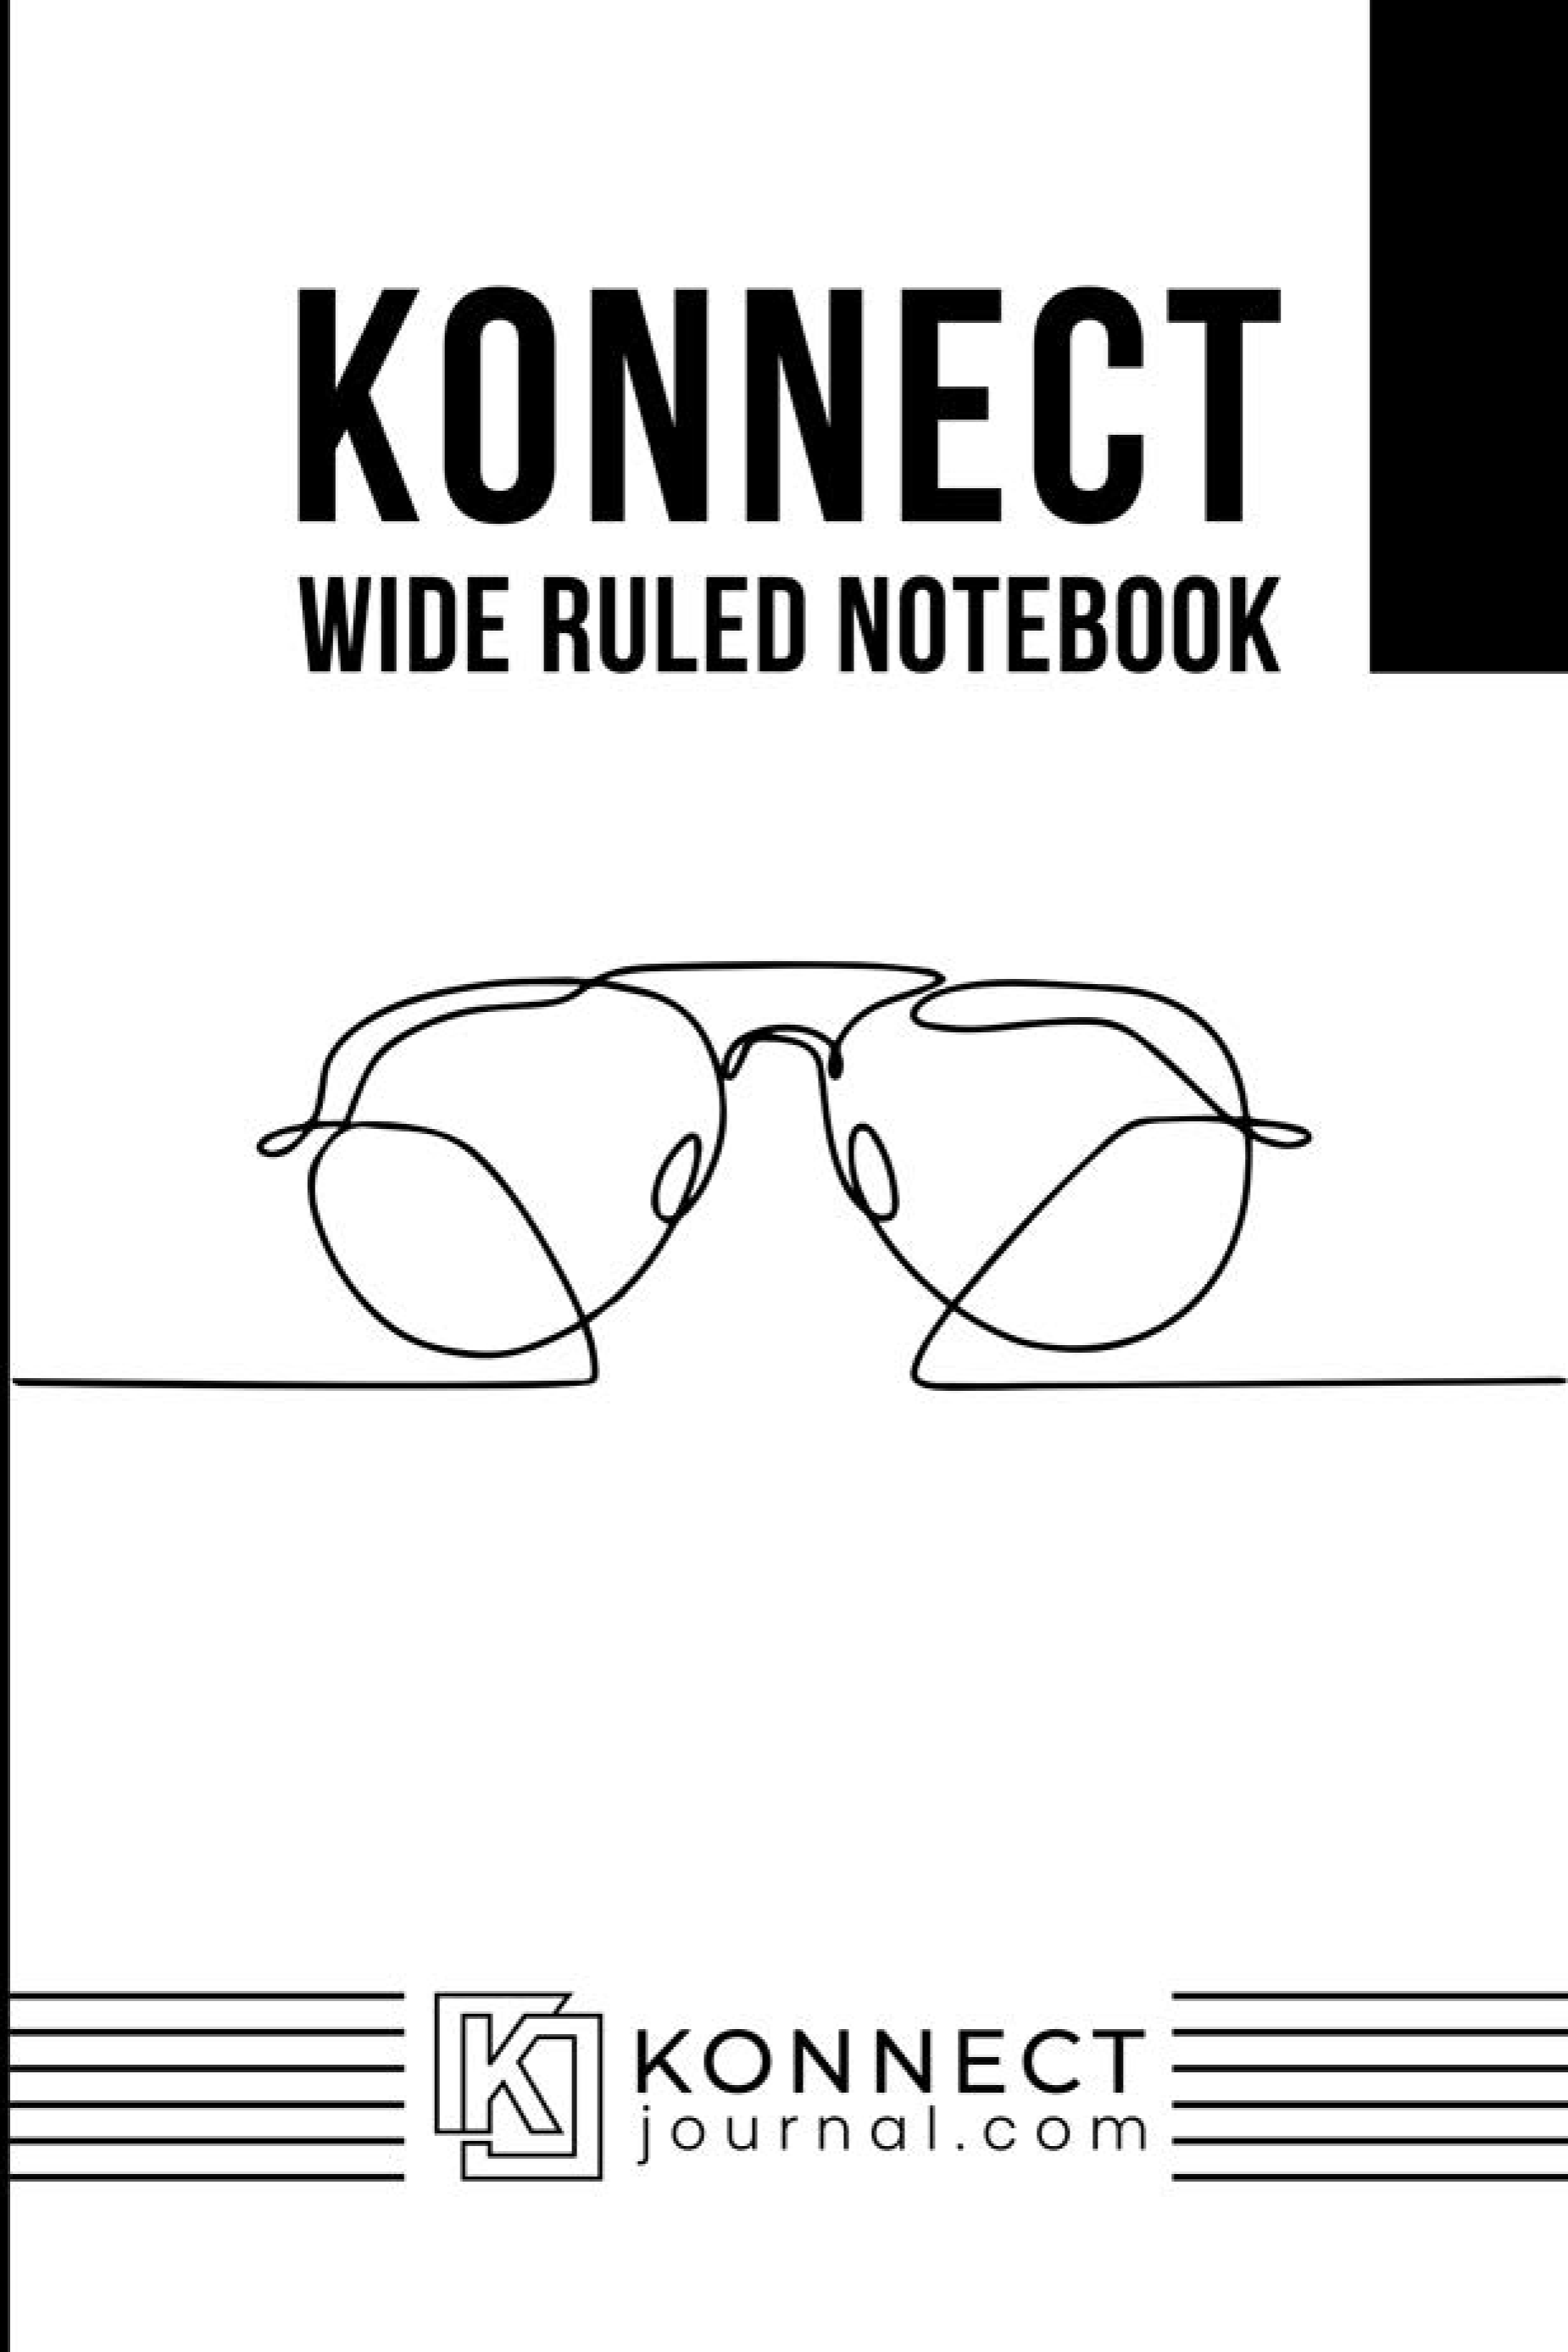 Konnect Wide Ruled Notebook cover page